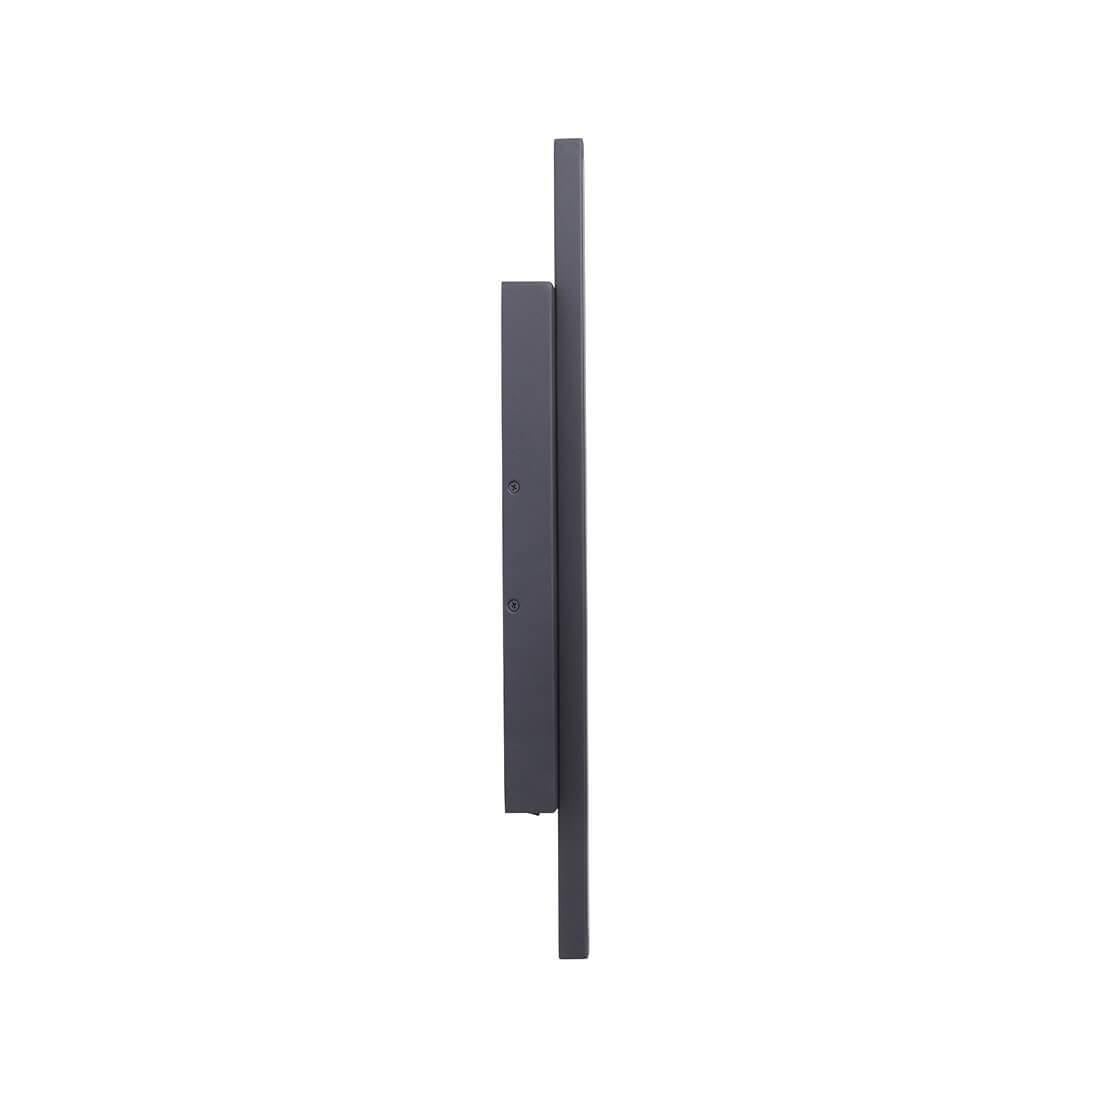 Line wall lamp by Kristina Dam Studio.
Materials: Black steel. LED lights.
Dimensions: 6 x 5.5 x H 56cm.

The Modernist furniture collection takes notions of modern design and yet the distinctive design touch of Kristina Dam Studio is evident in